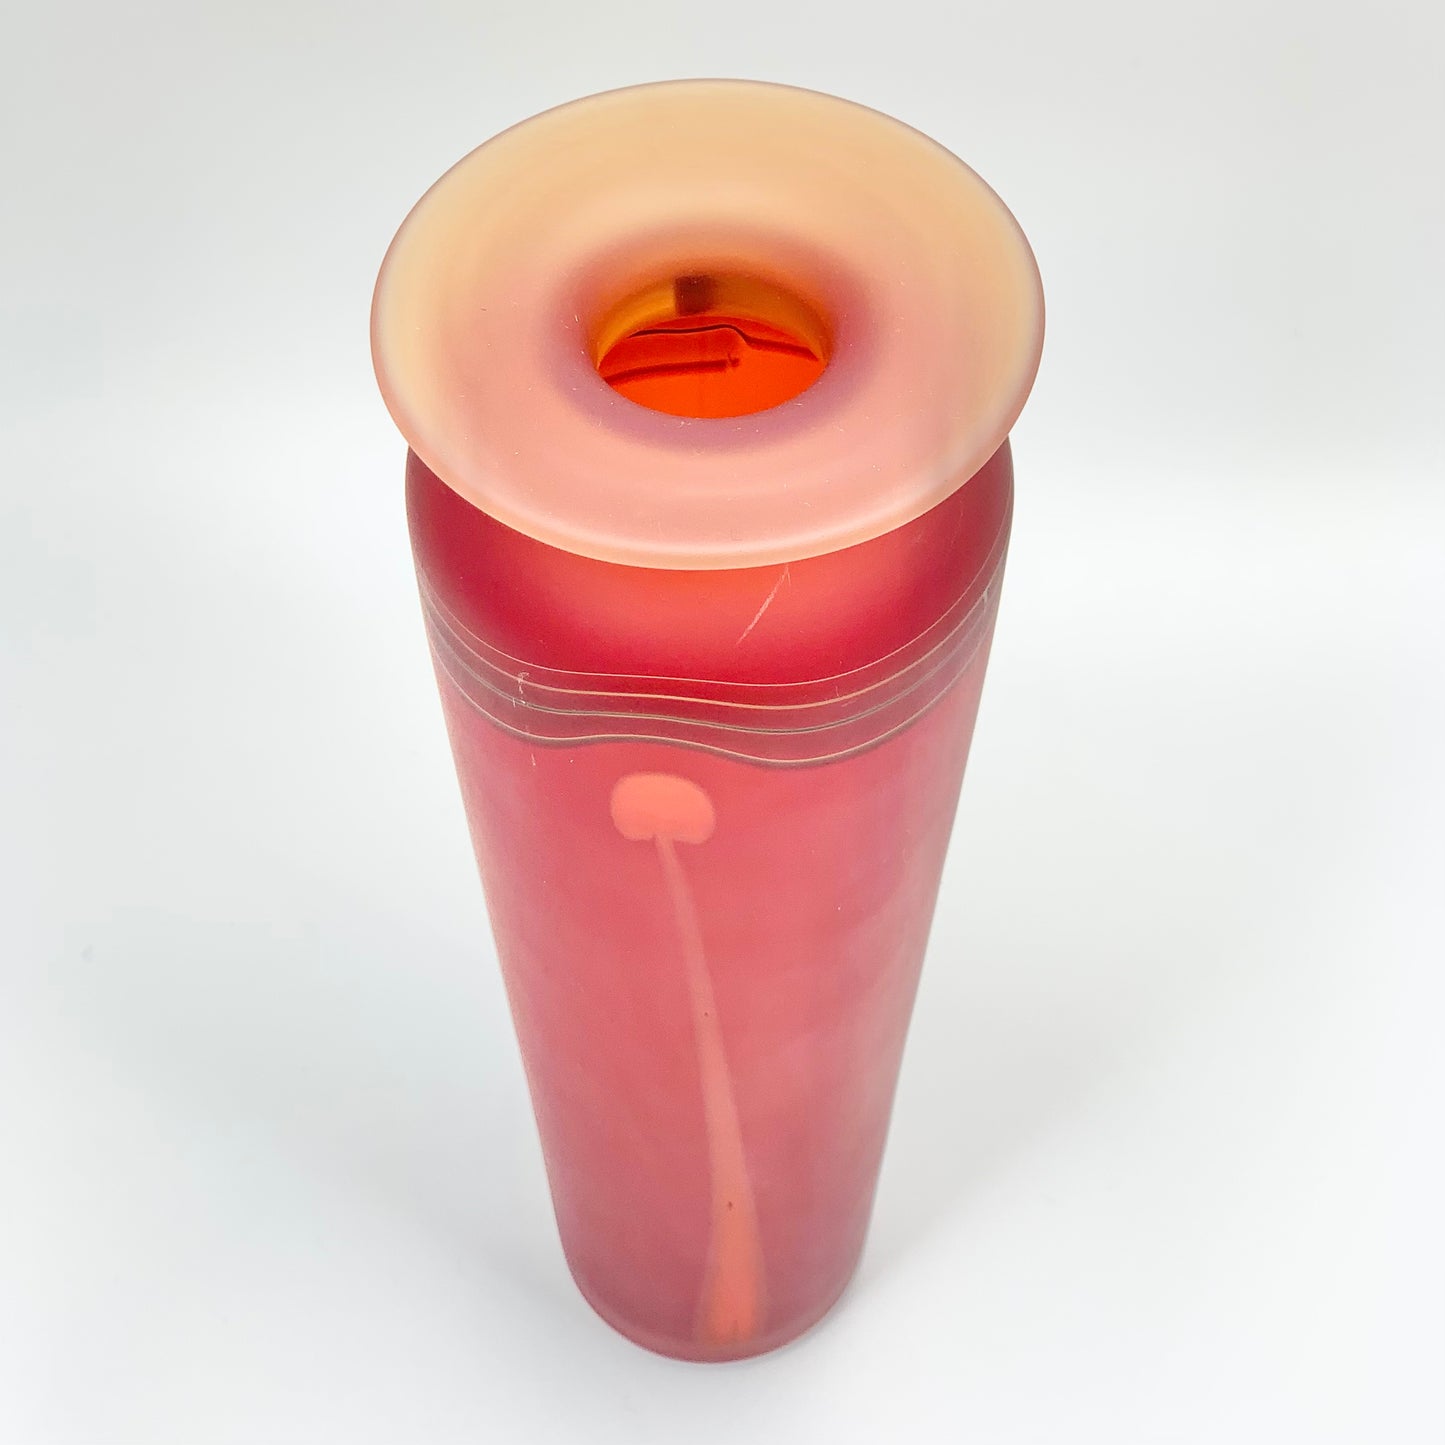 Extremely rare and collectible red satin glass vase by Robert Wynne for Denizen Studio